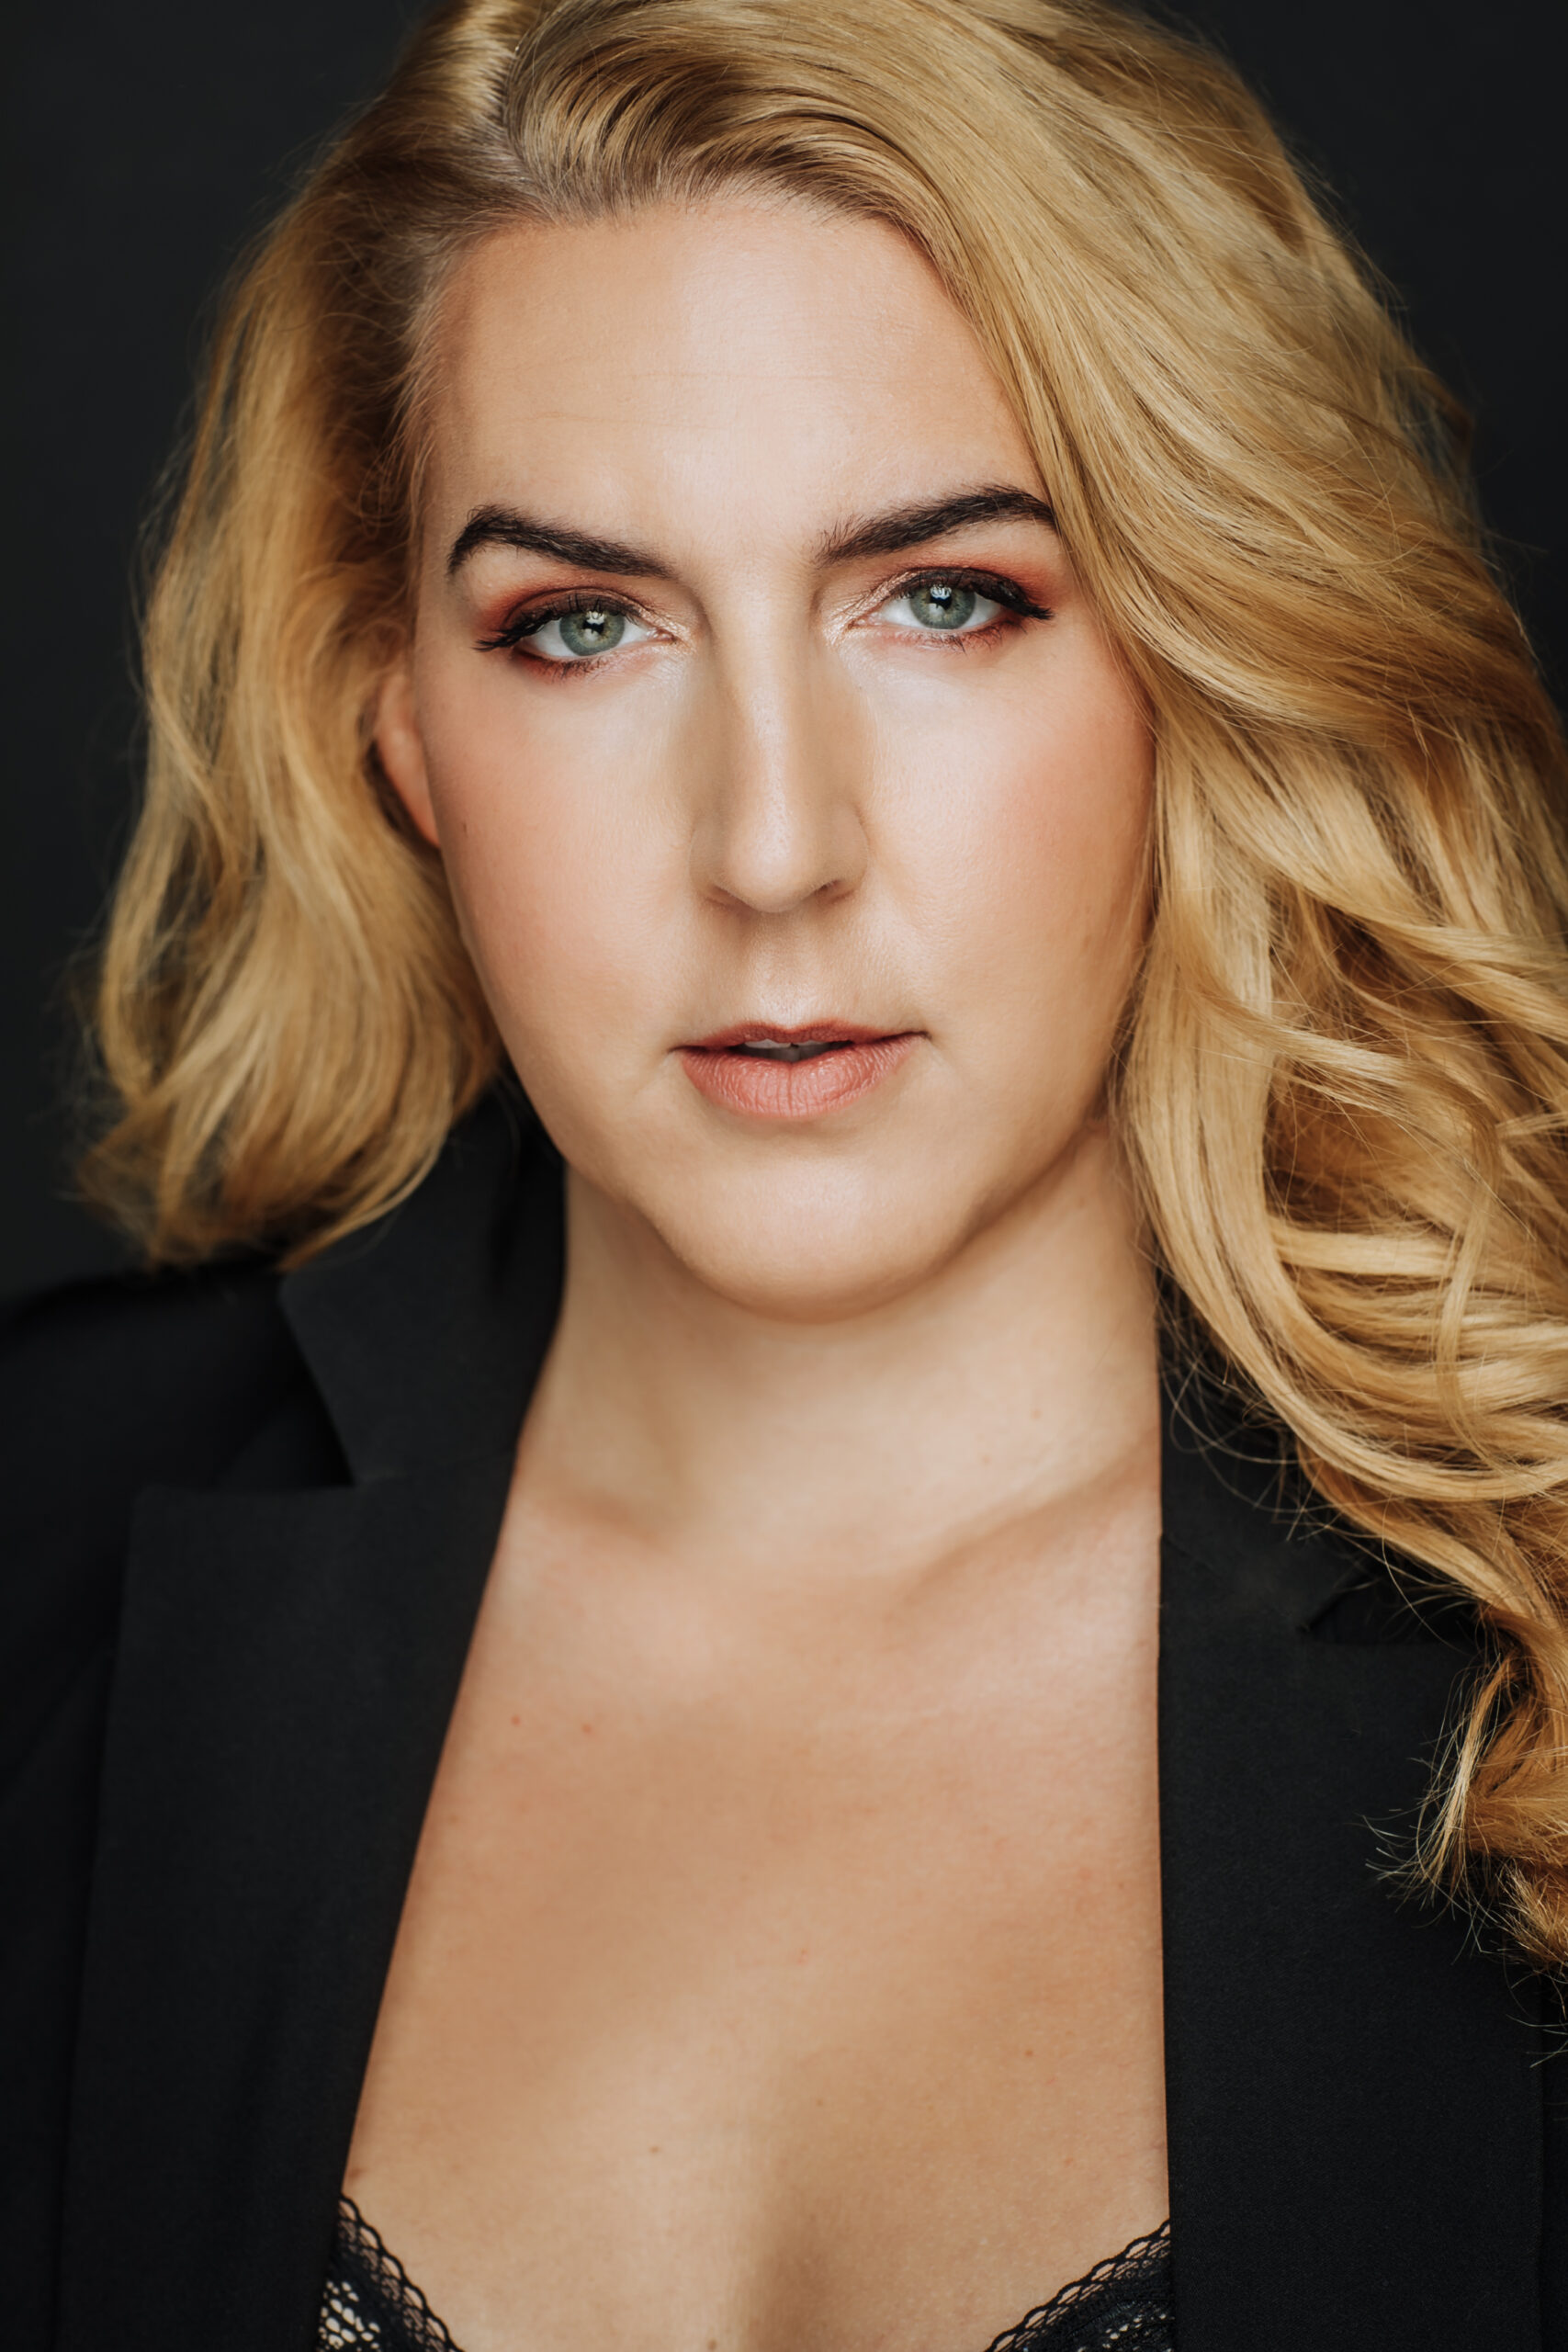 A headshot of Luna Ferguson. They have shoulder length blonde hair and are wearing a black blazer.